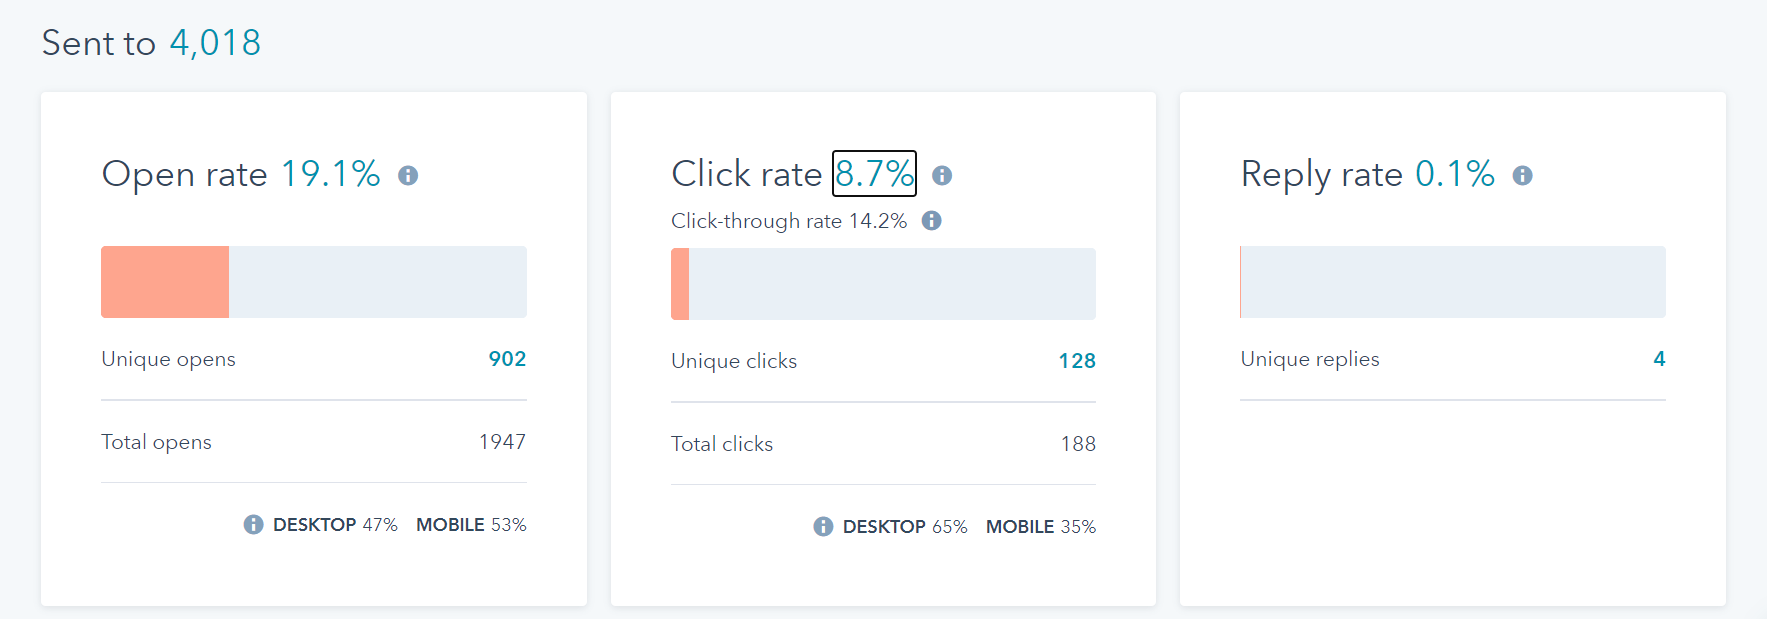 You can always see open rates and click-through rates for email.